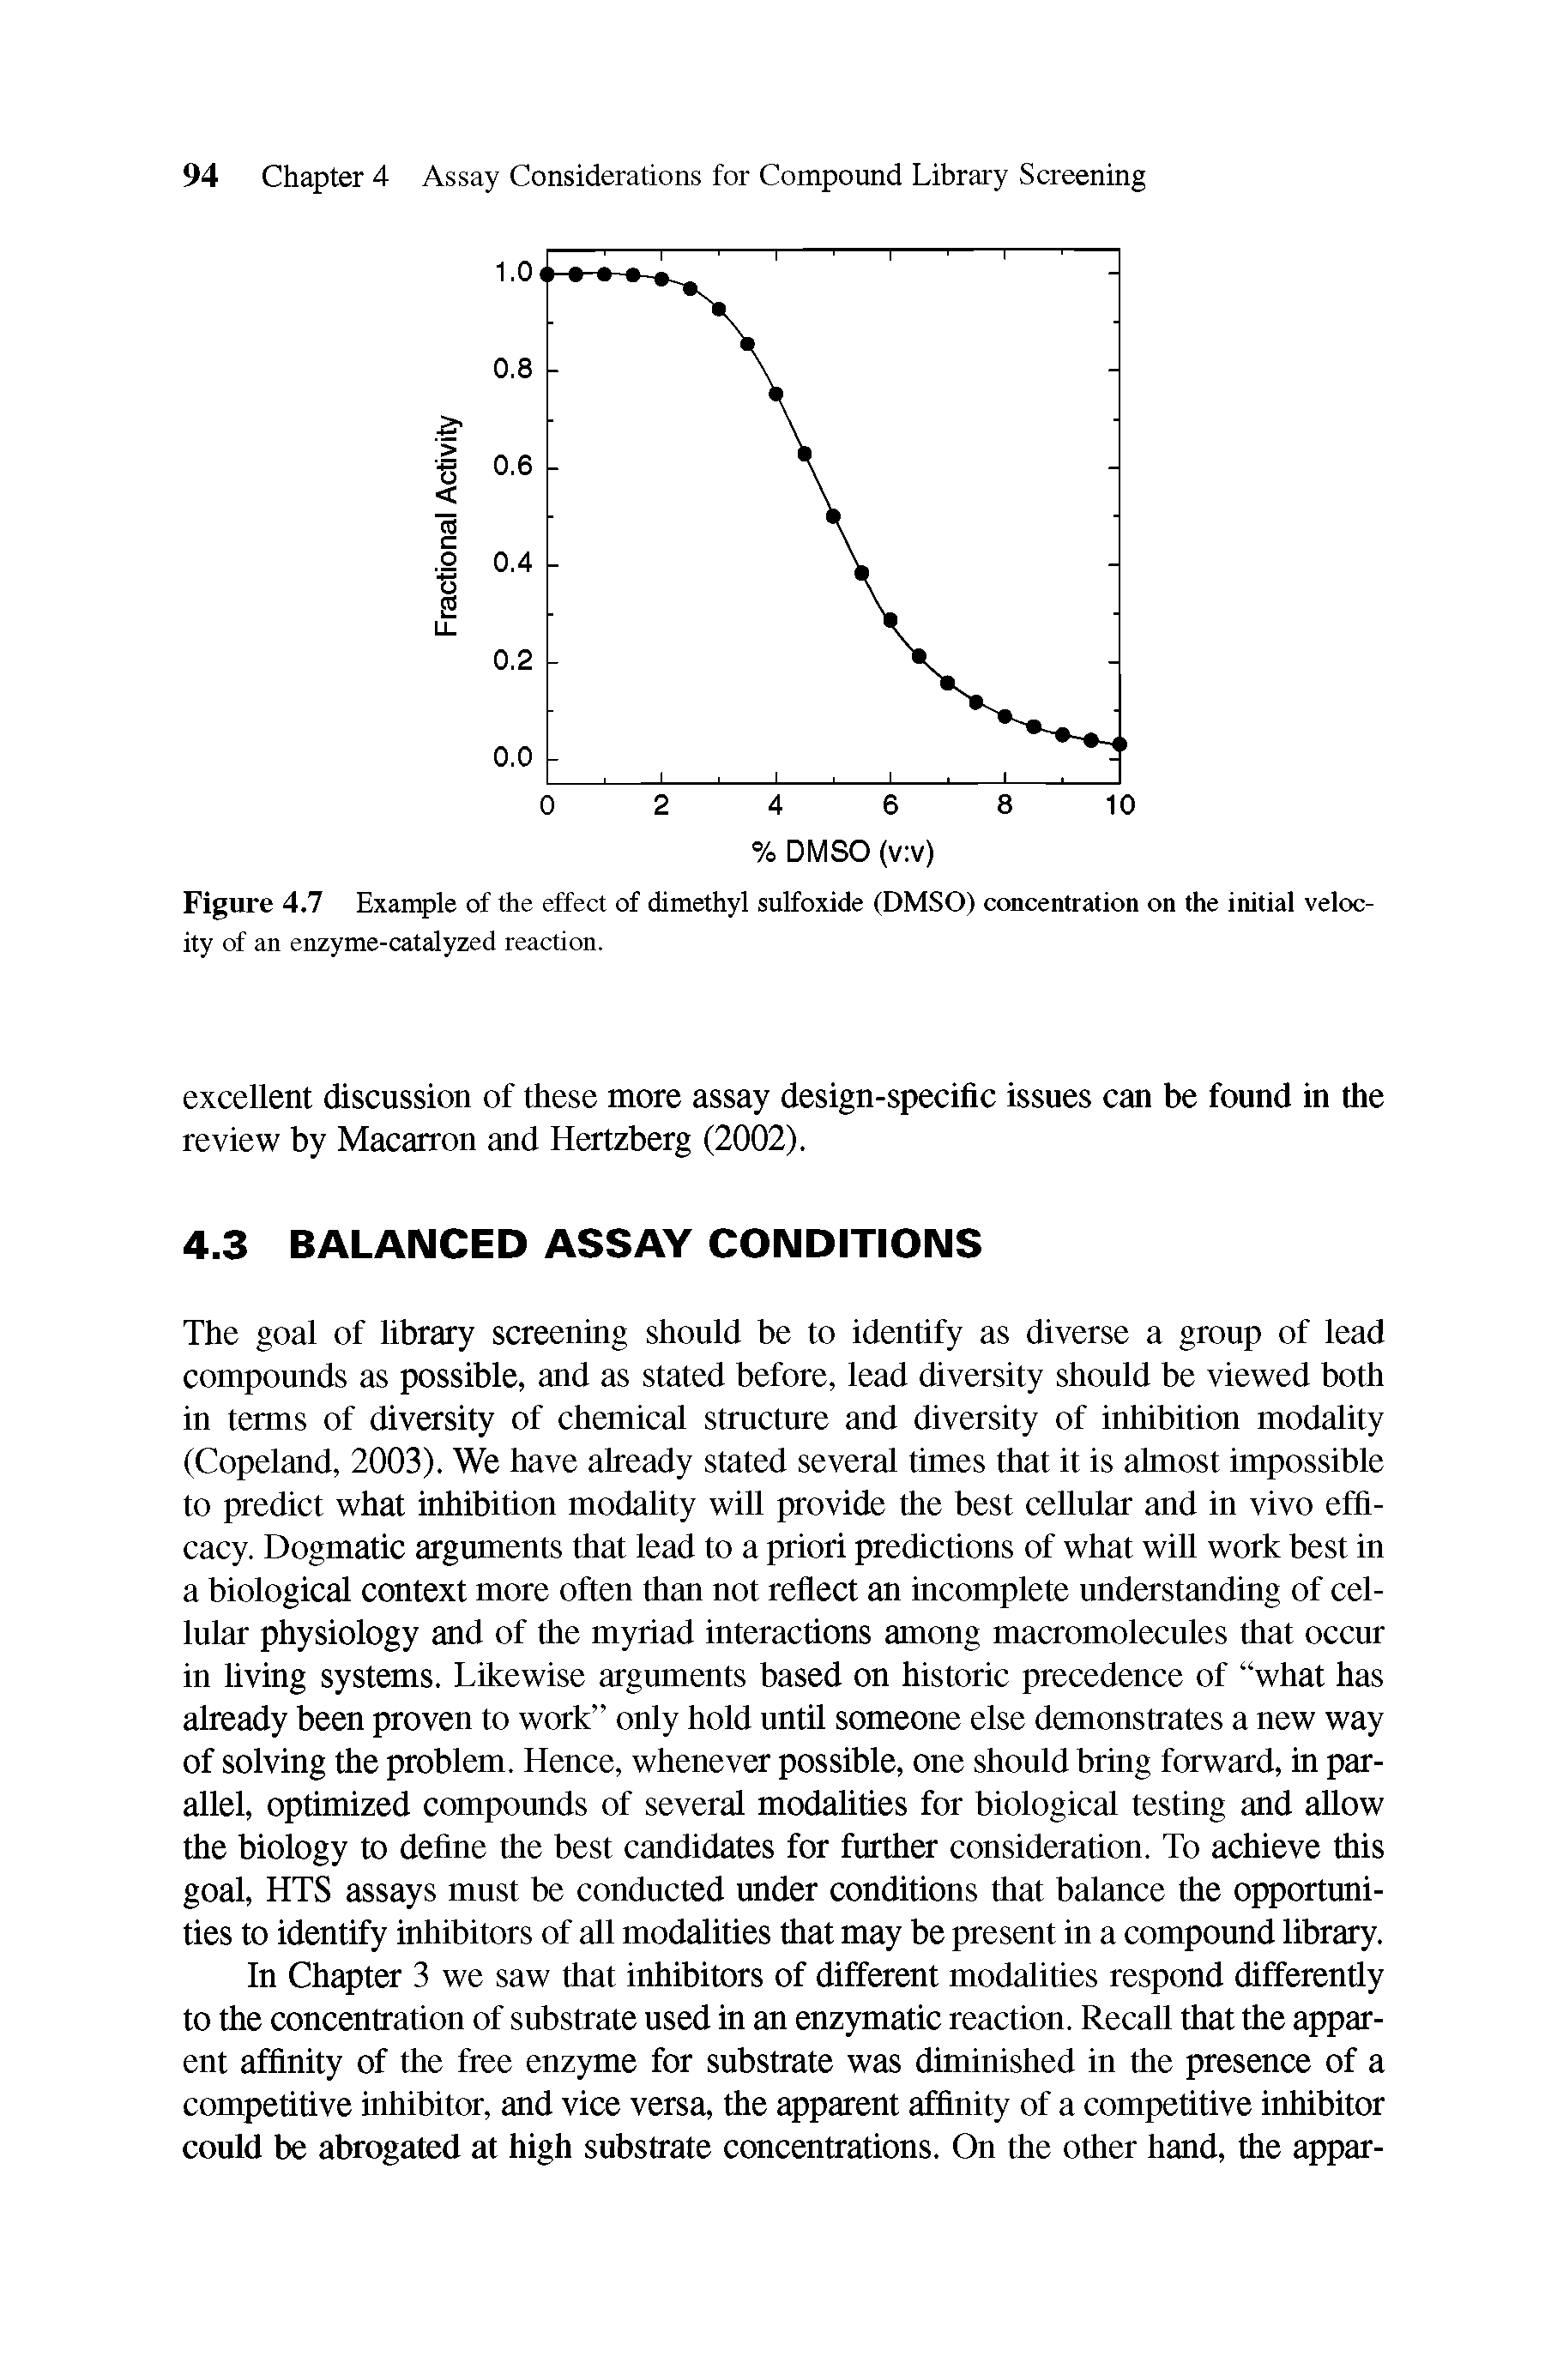 Figure 4.7 Example of the effect of dimethyl sulfoxide (DMSO) concentration on the initial velocity of an enzyme-catalyzed reaction.